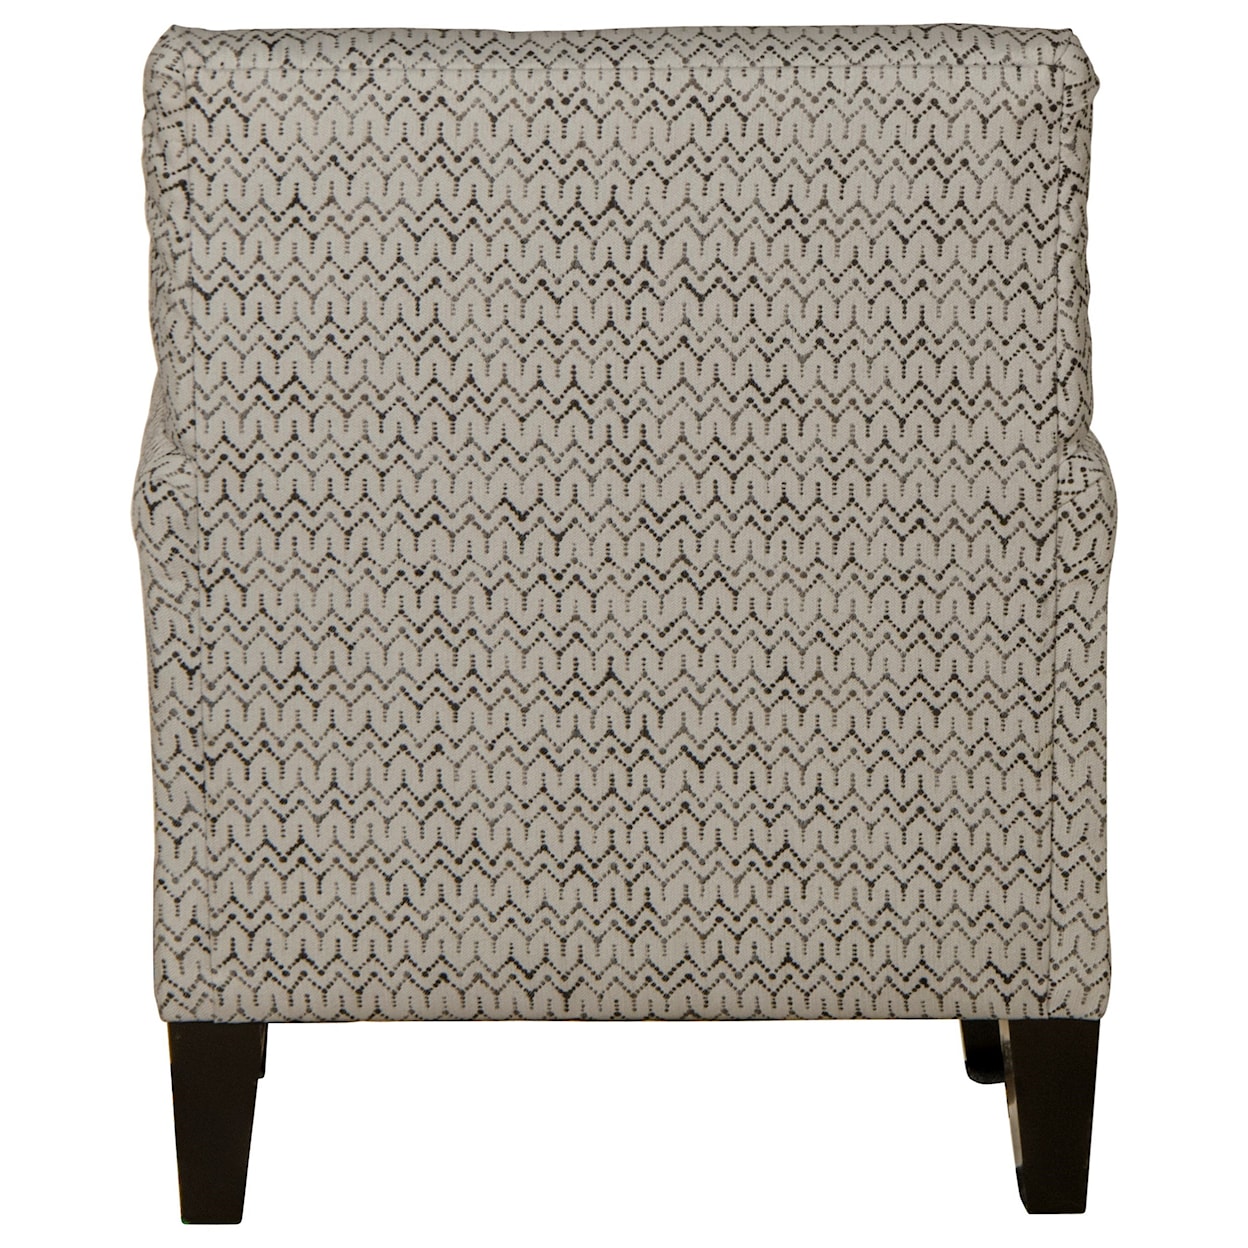 Jackson Furniture 3279 Lewiston Upholstered Accent Chair